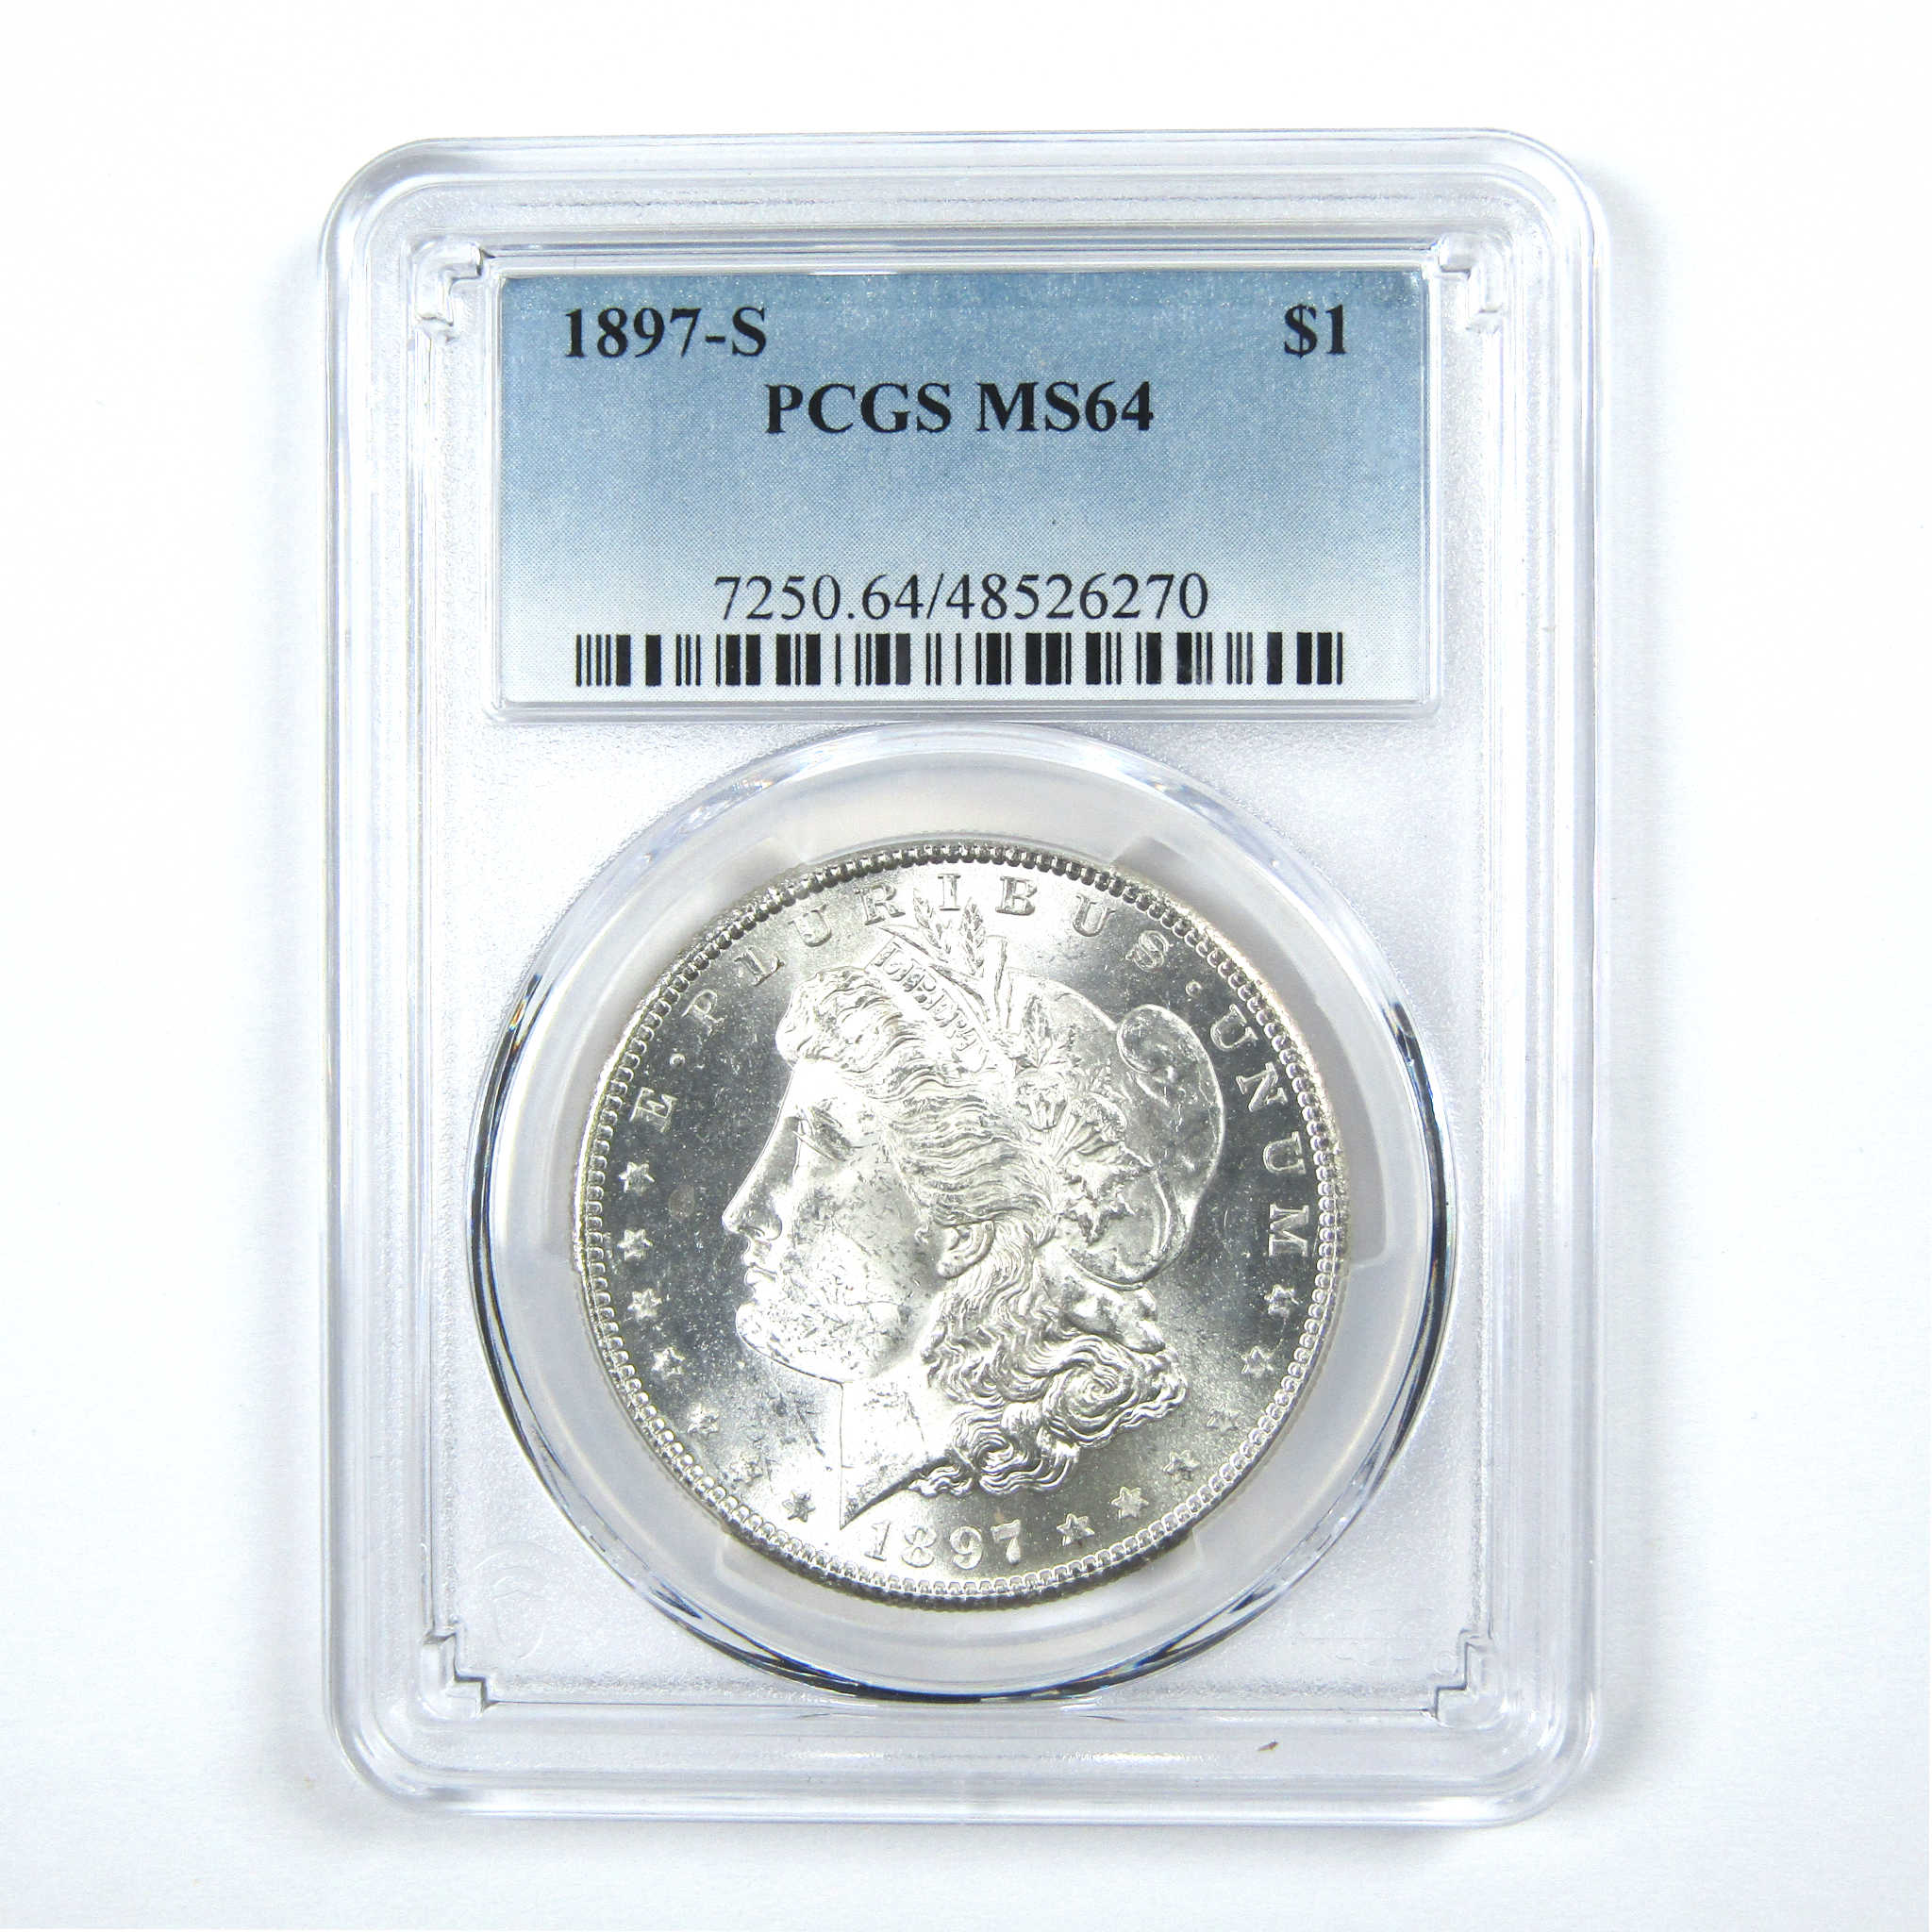 1897 S Morgan Dollar MS 64 PCGS Silver $1 Uncirculated Coin SKU:I13921 - Morgan coin - Morgan silver dollar - Morgan silver dollar for sale - Profile Coins &amp; Collectibles